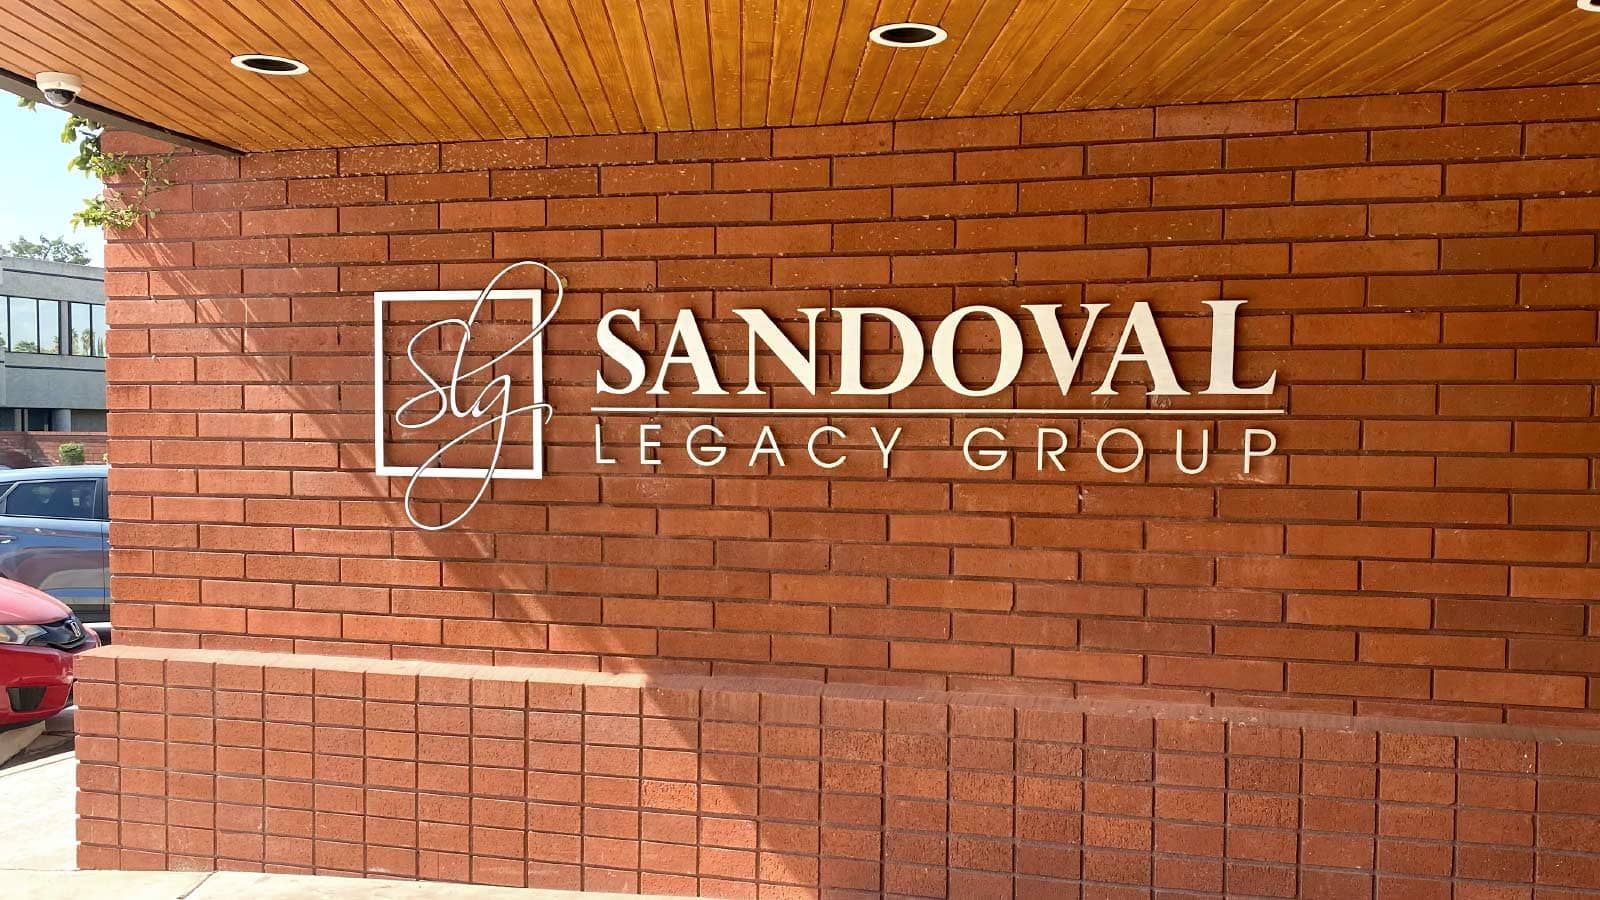 Sandoval Legacy Group aluminum sign mounted on the wall